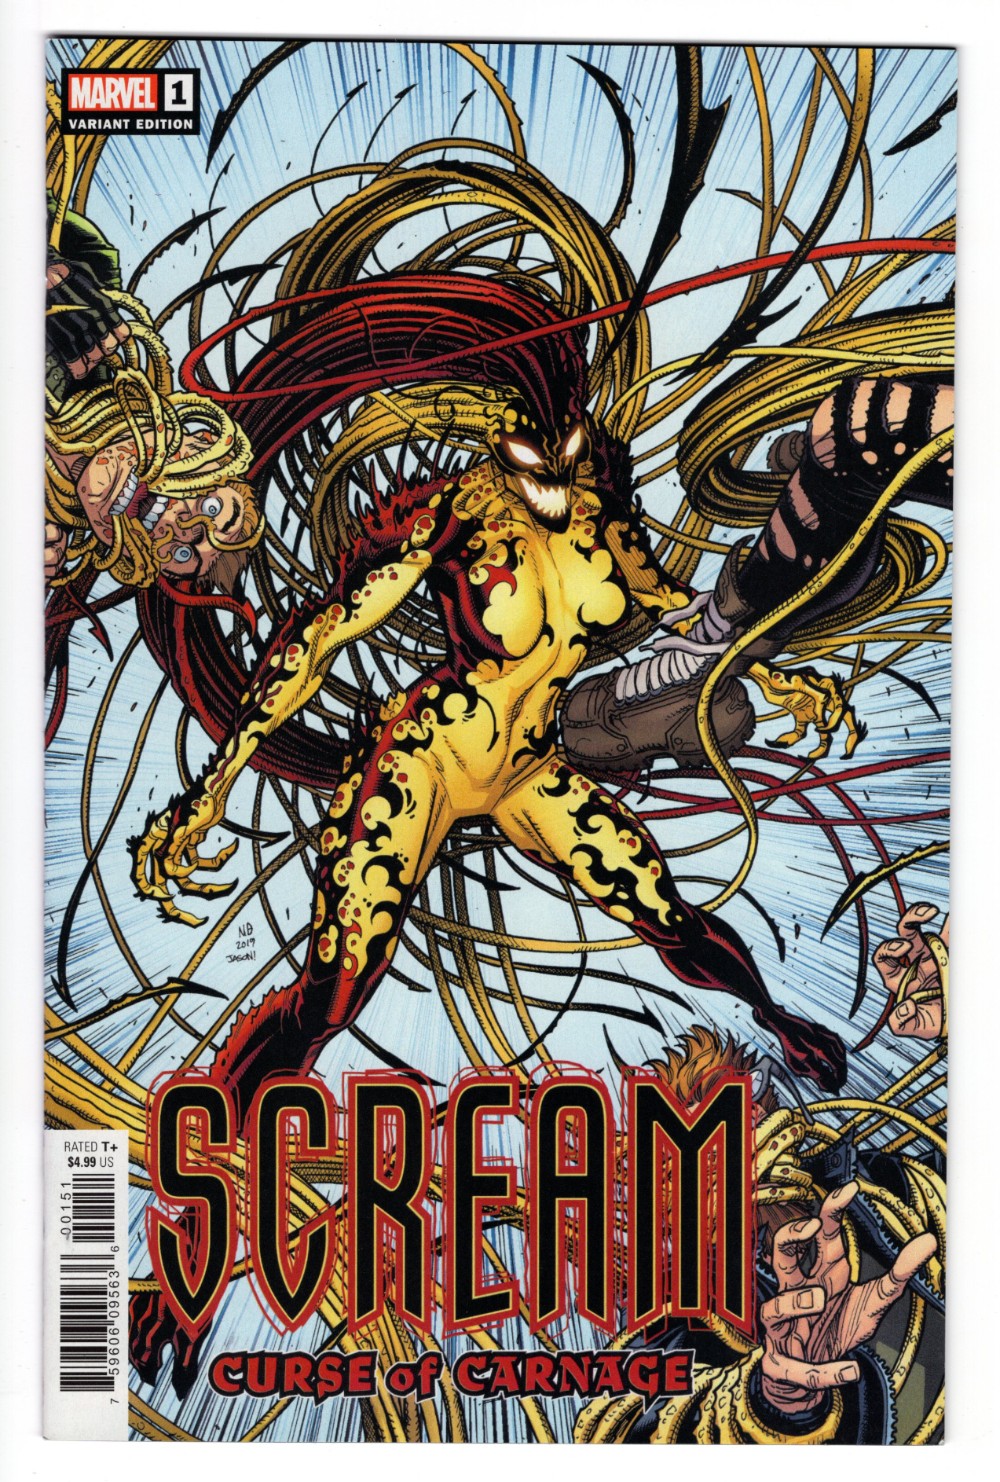 SCREAM CURSE OF CARNAGE #1 1 in 50 BRADSHAW VARIANT